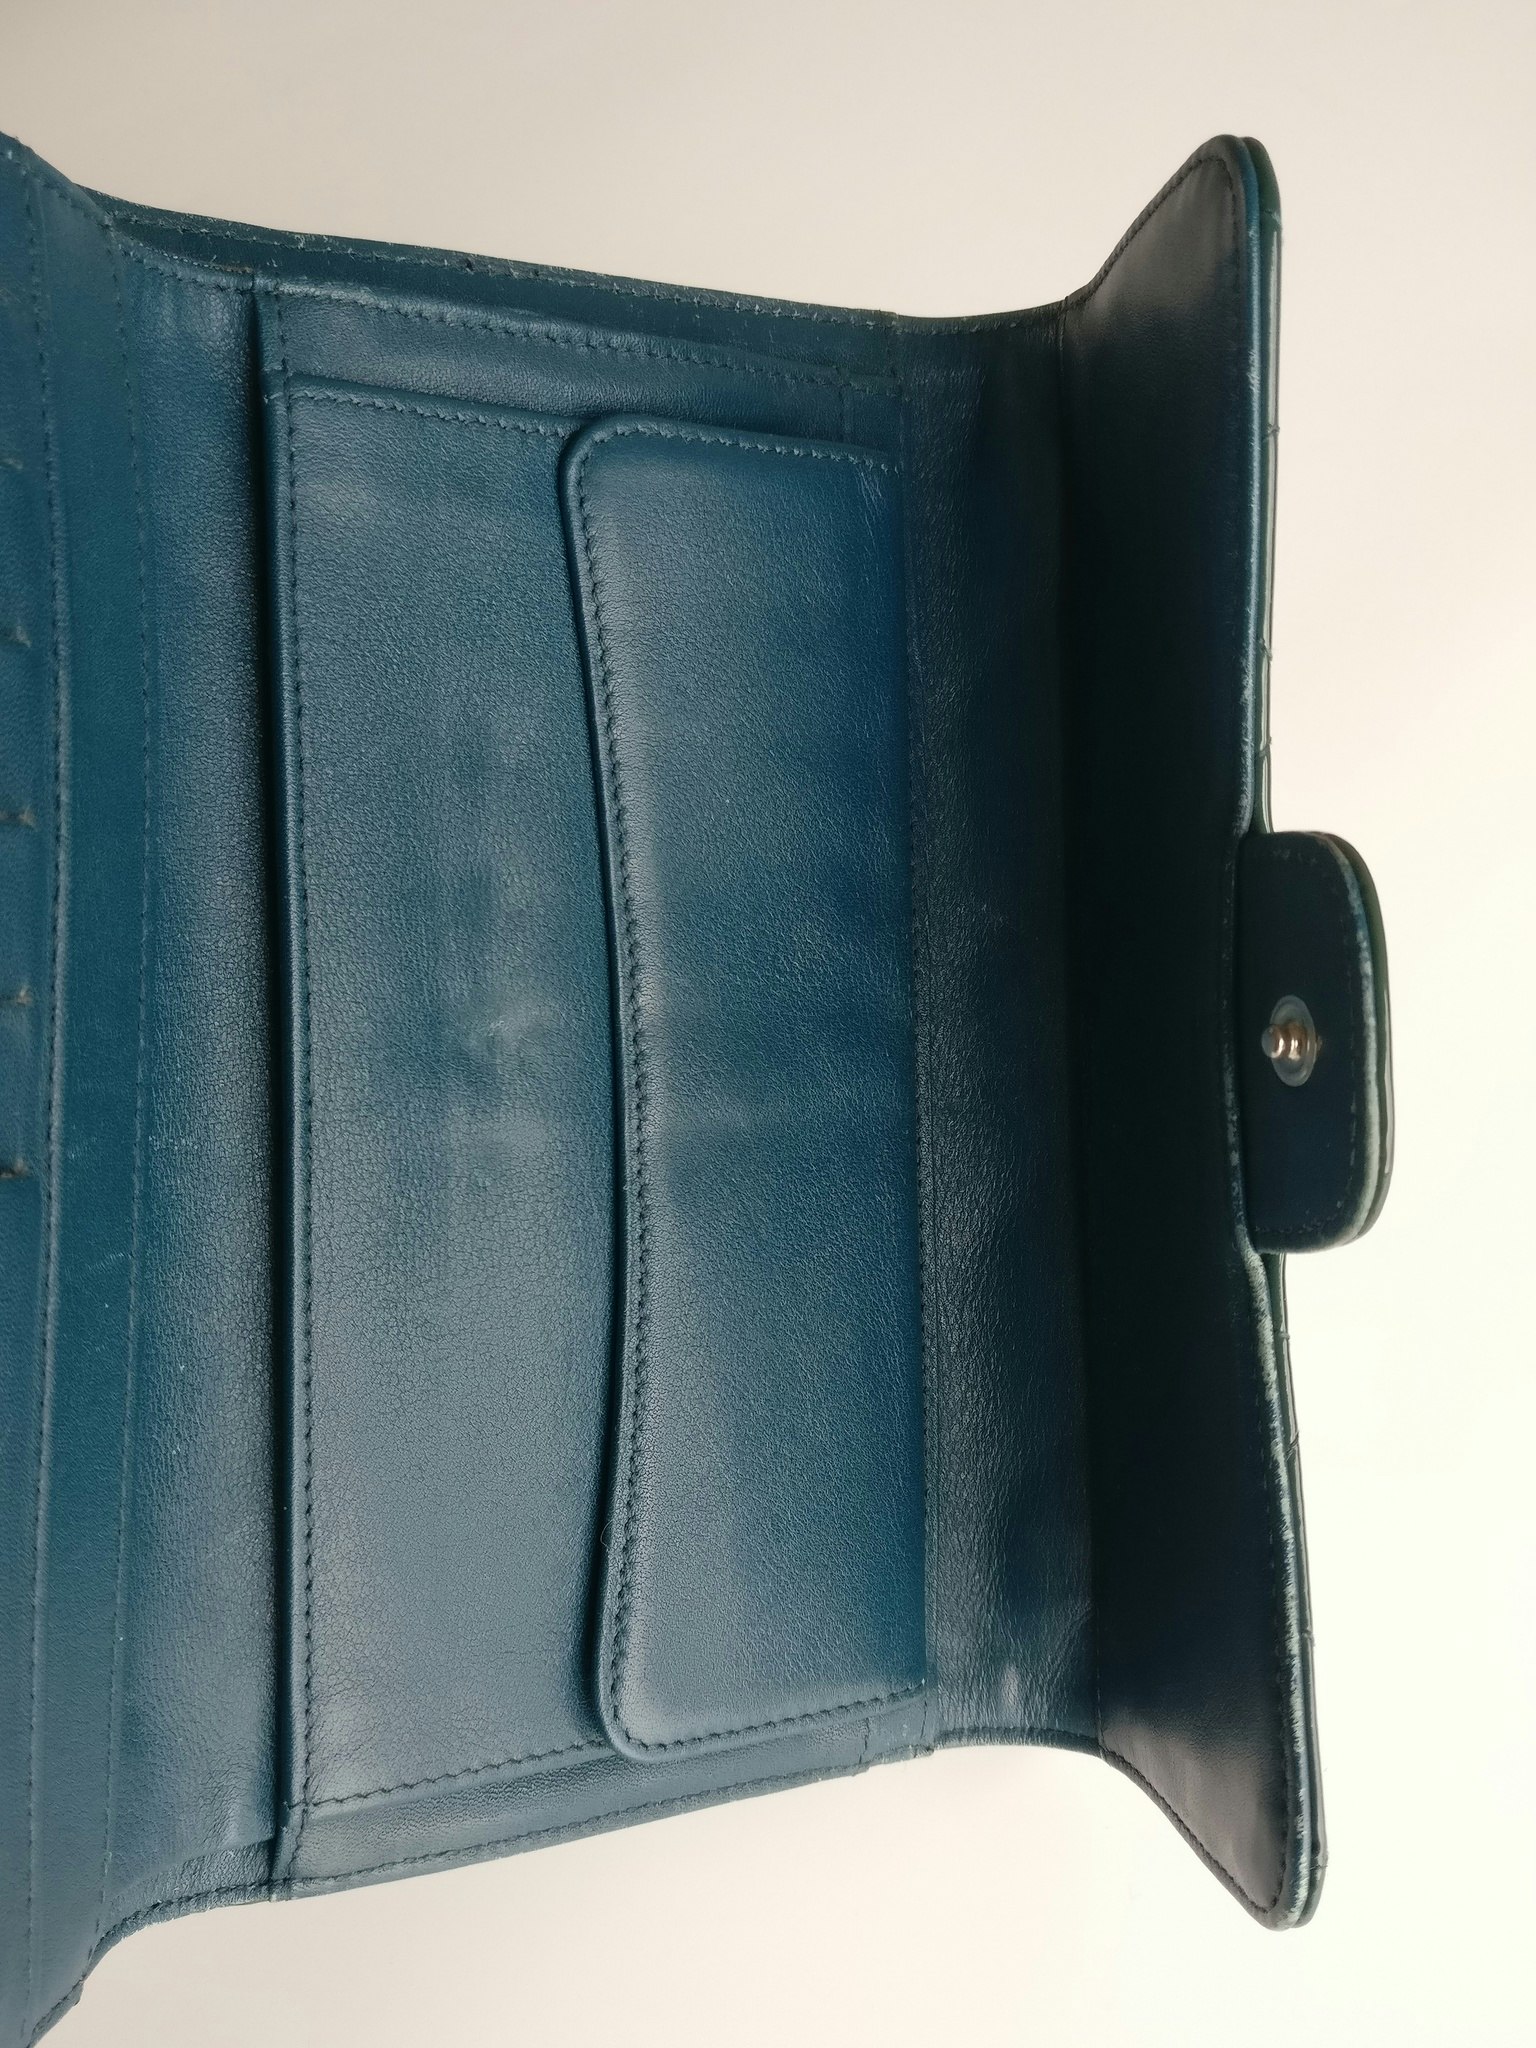 Chanel Classic Long Flap wallet - Good or Bag